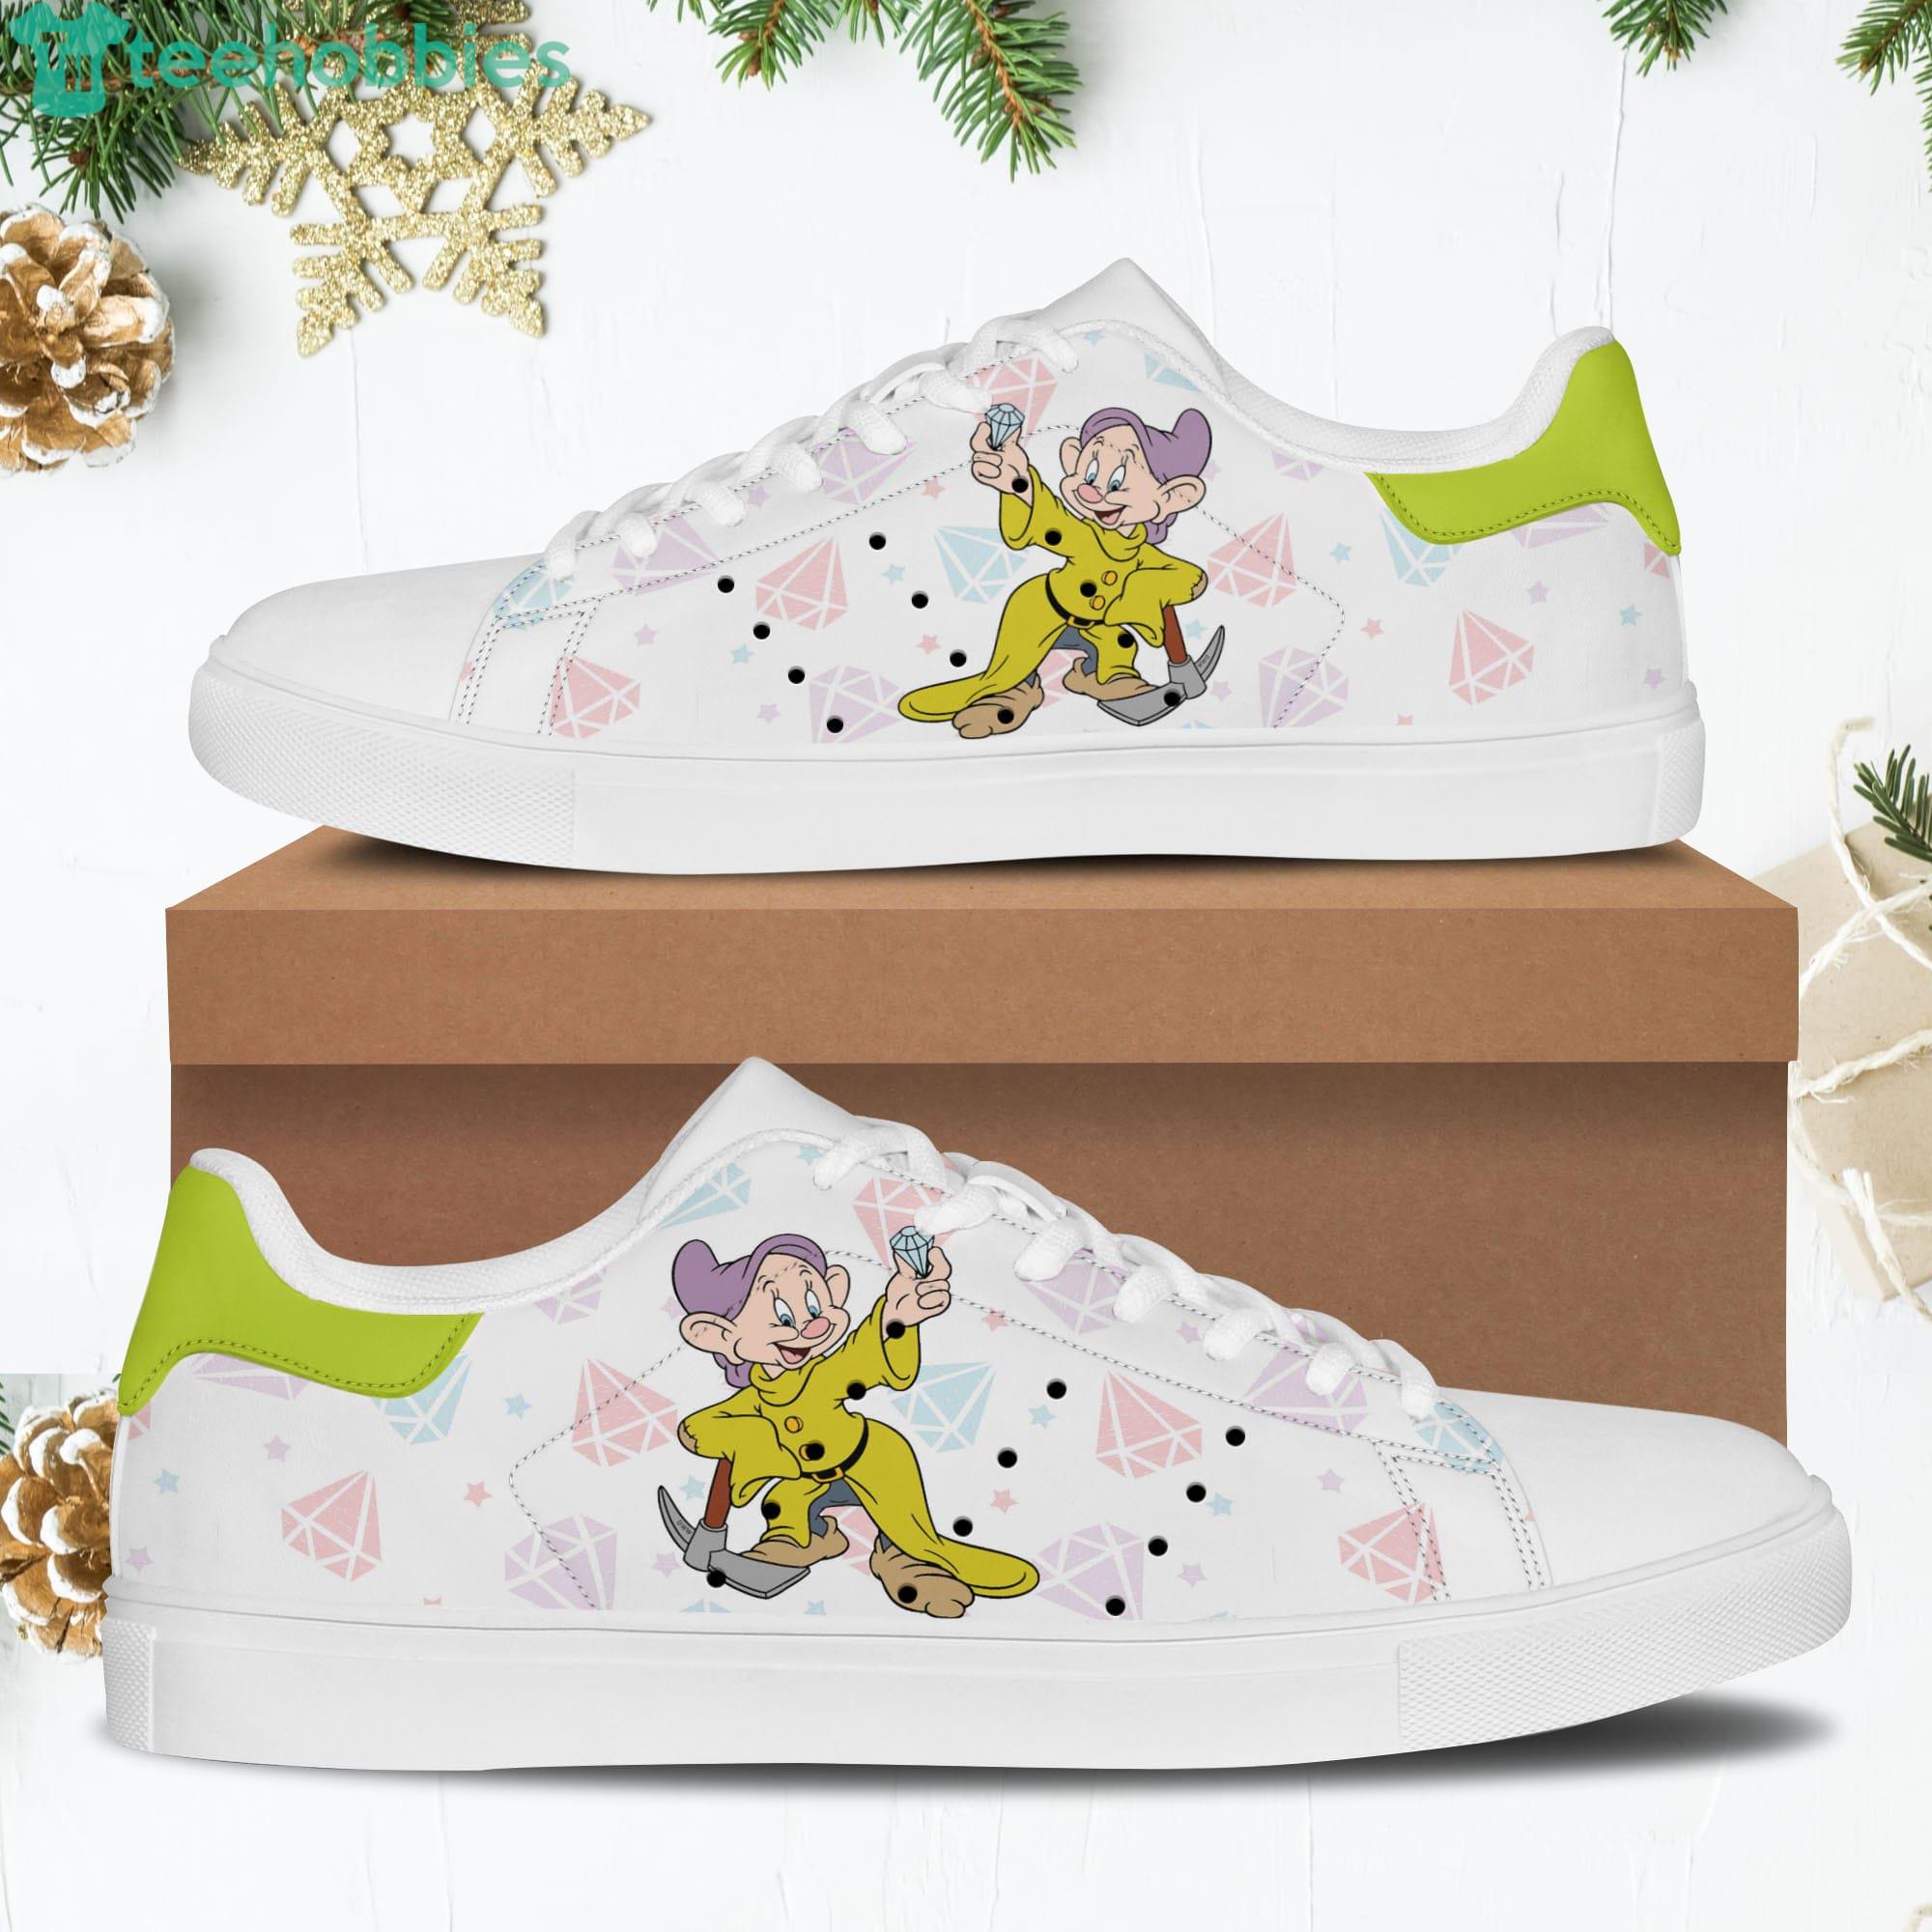 Dopey Dwarf Green White Stan Smith Disney Carrtoon Low Top Skate Shoes Product Photo 1